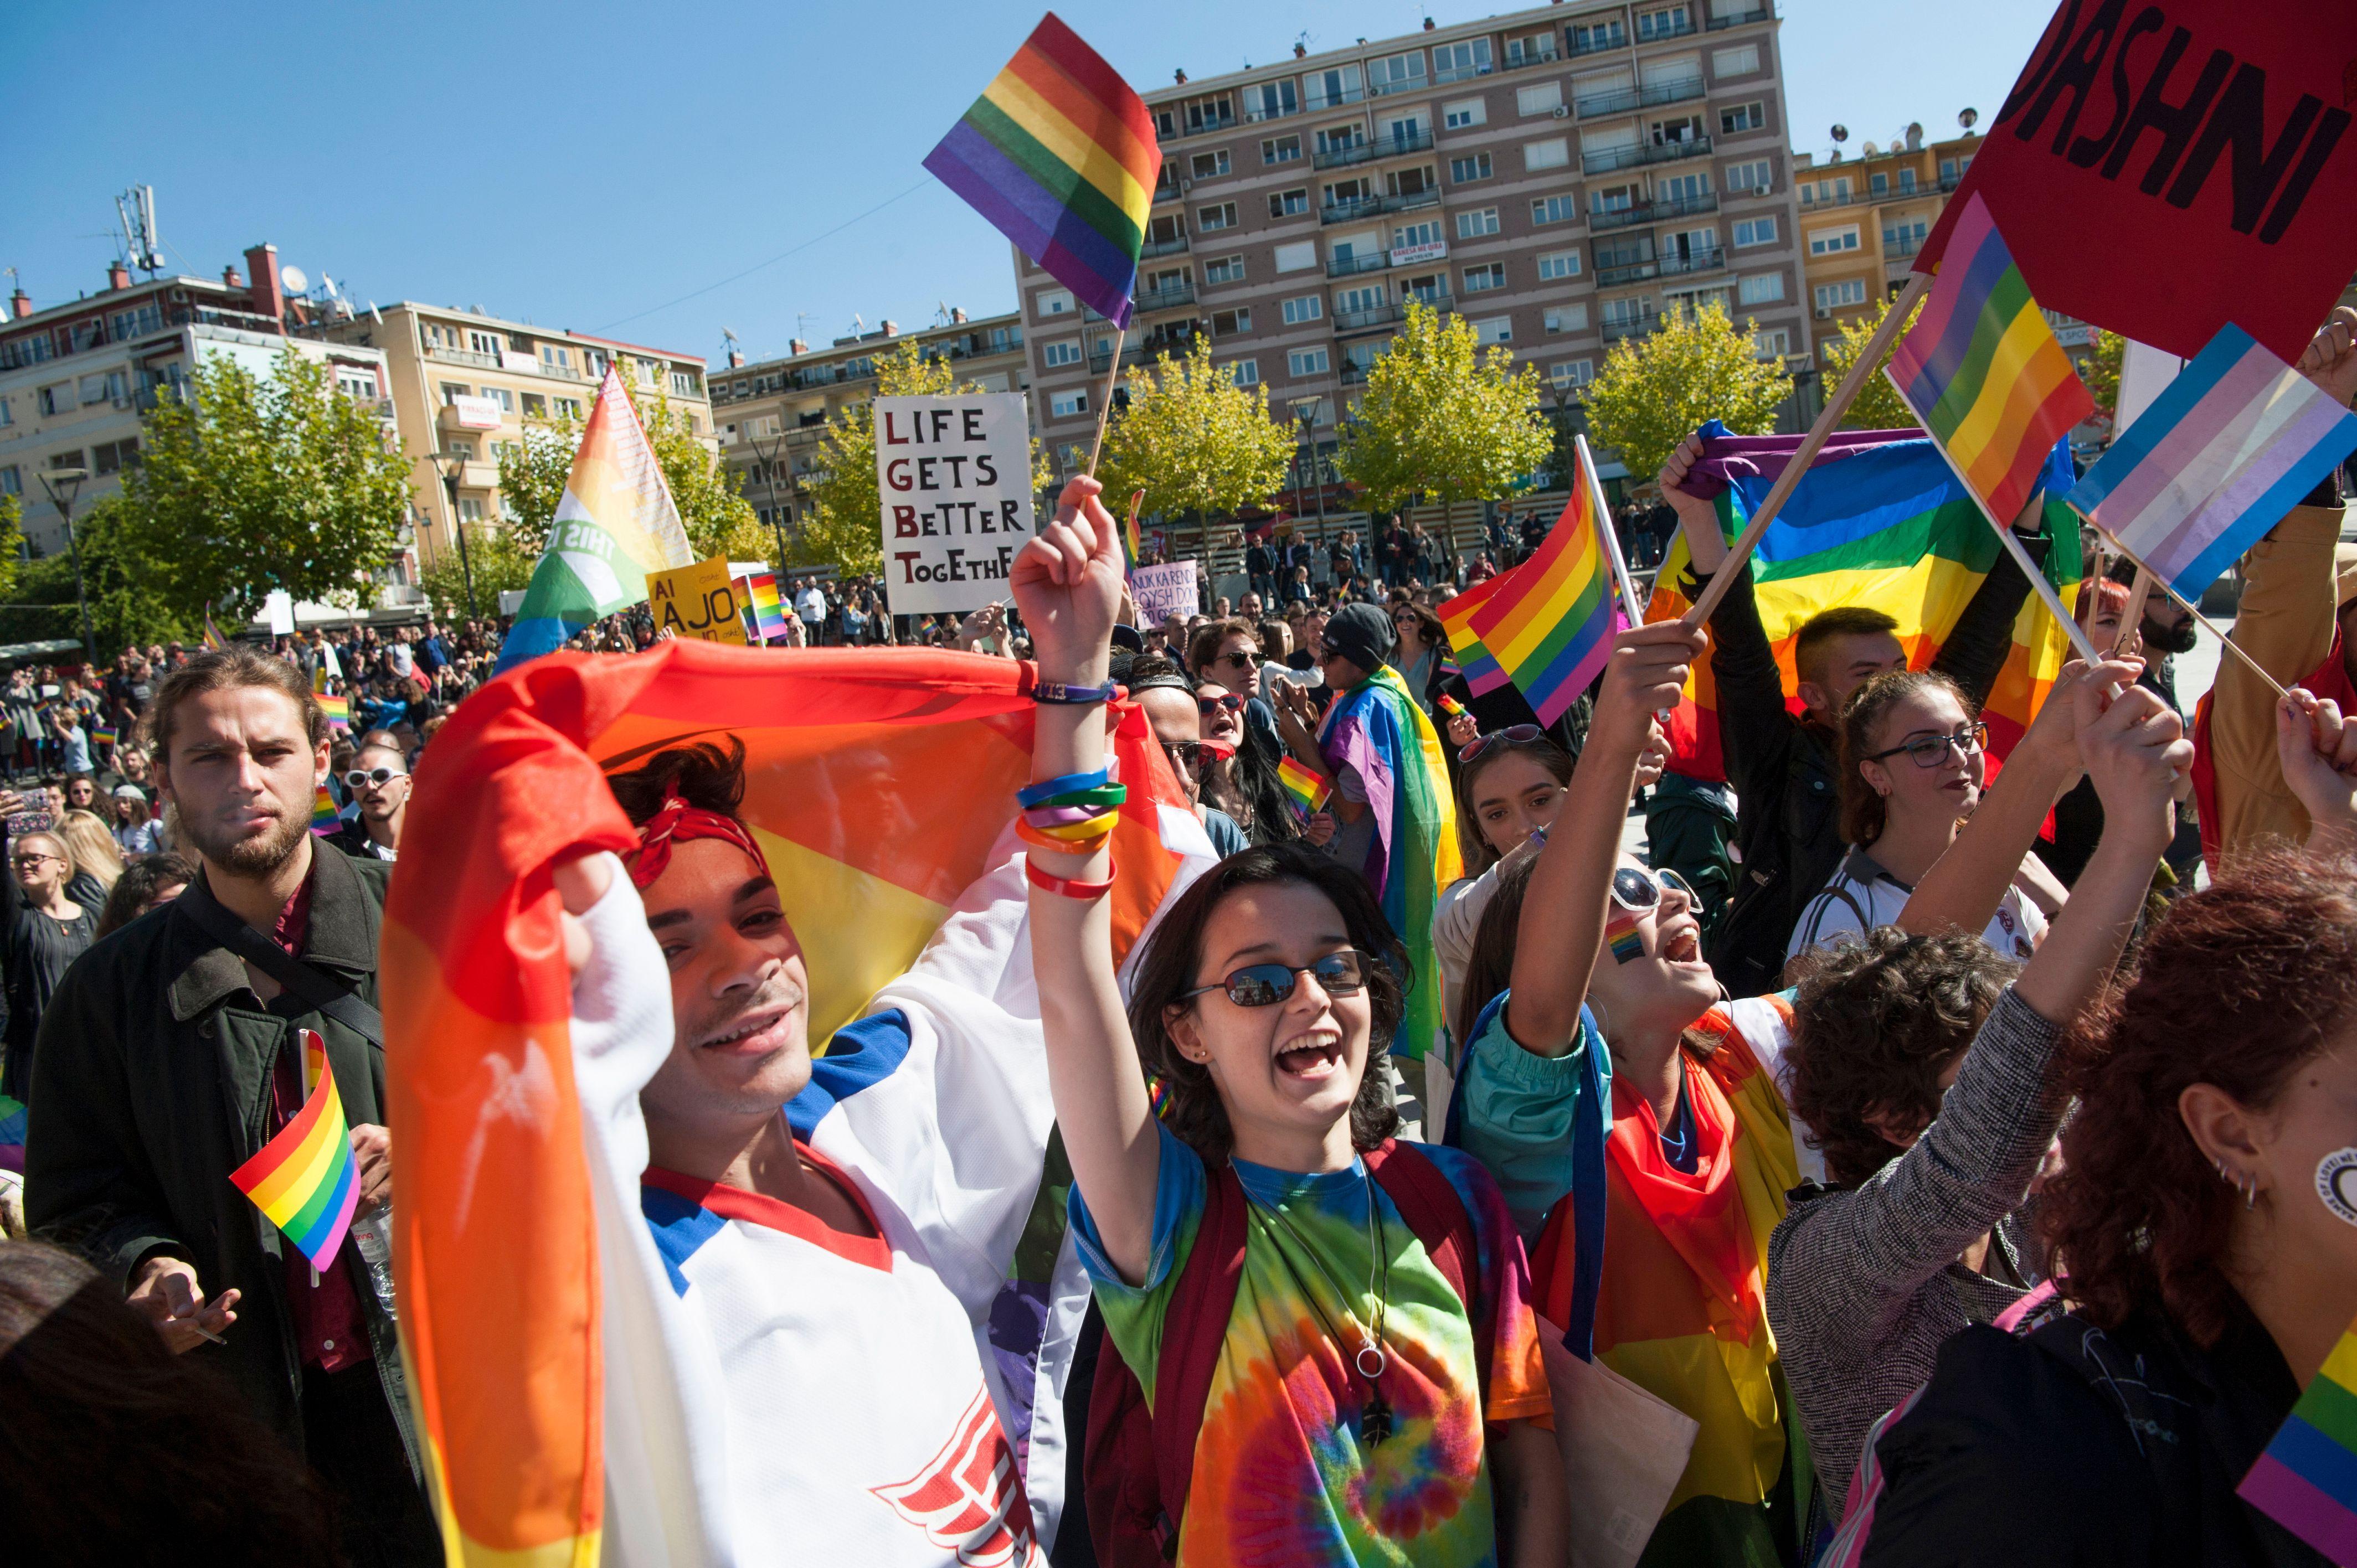 Kosovo gay pride parade for LGBT rights is first ever in Muslim-majority  nation on edge of Europe - CBS News